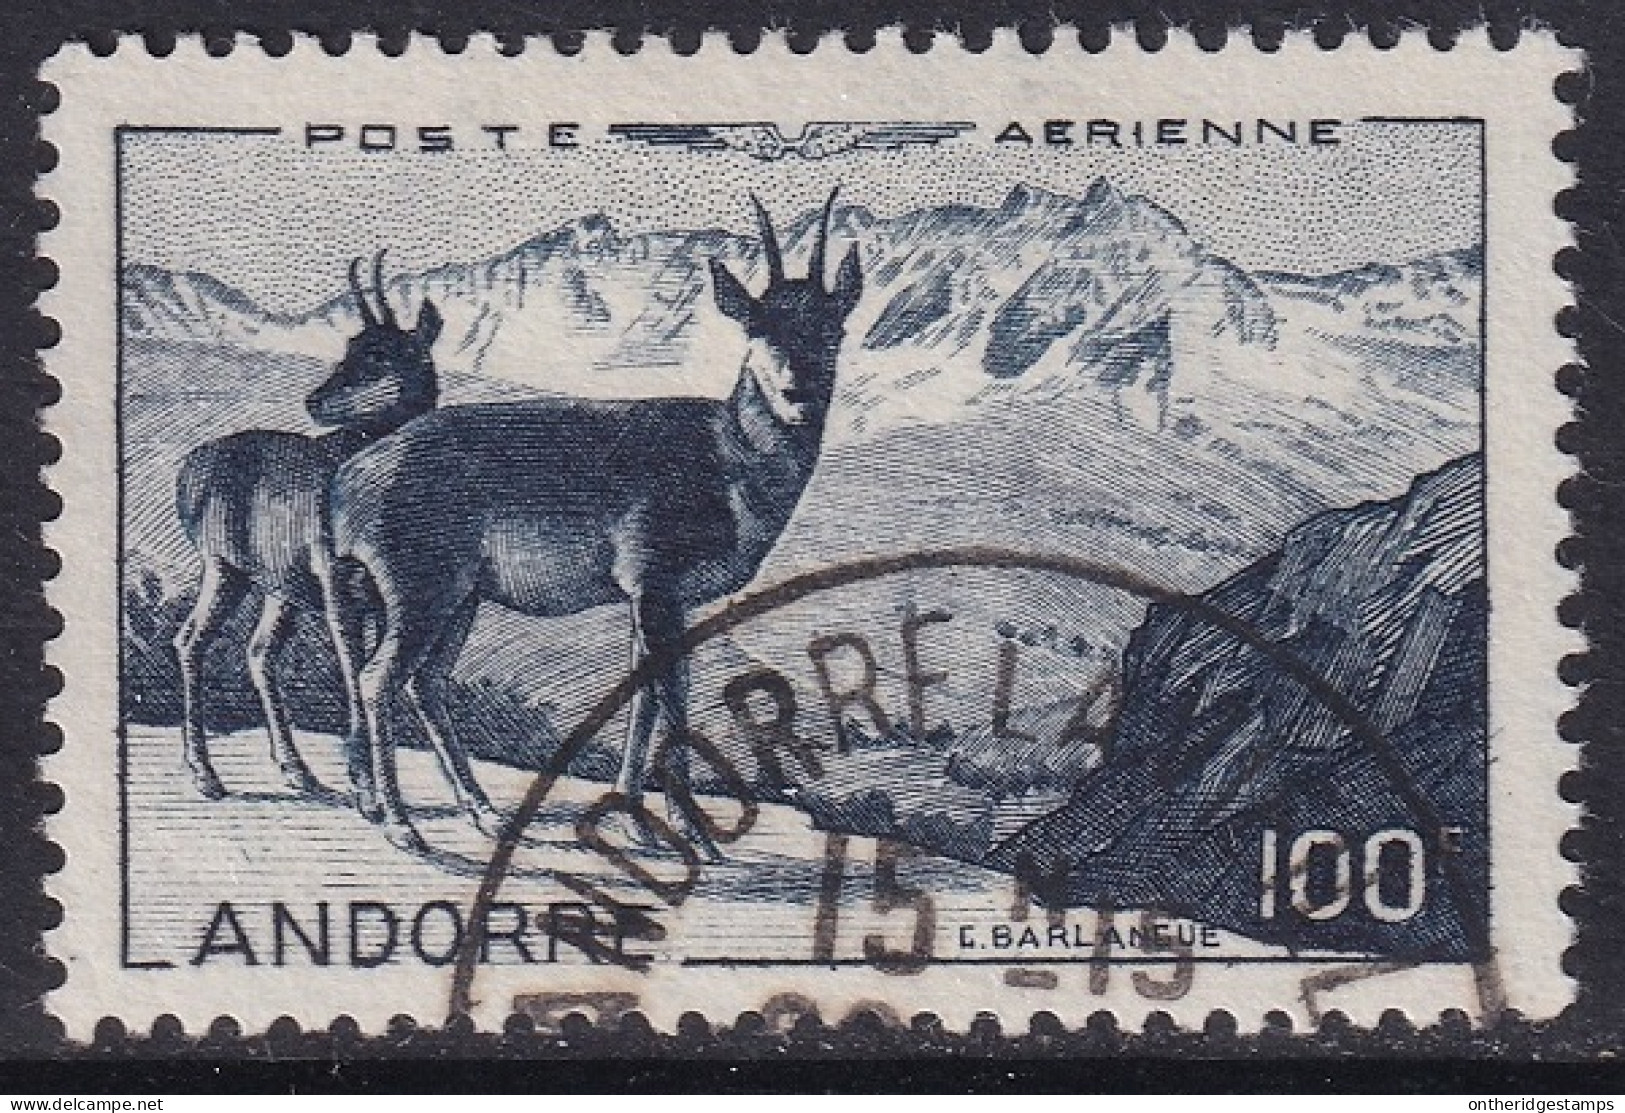 Andorra French 1950 Sc C1 Andorre PA1 Air Post Used - Airmail